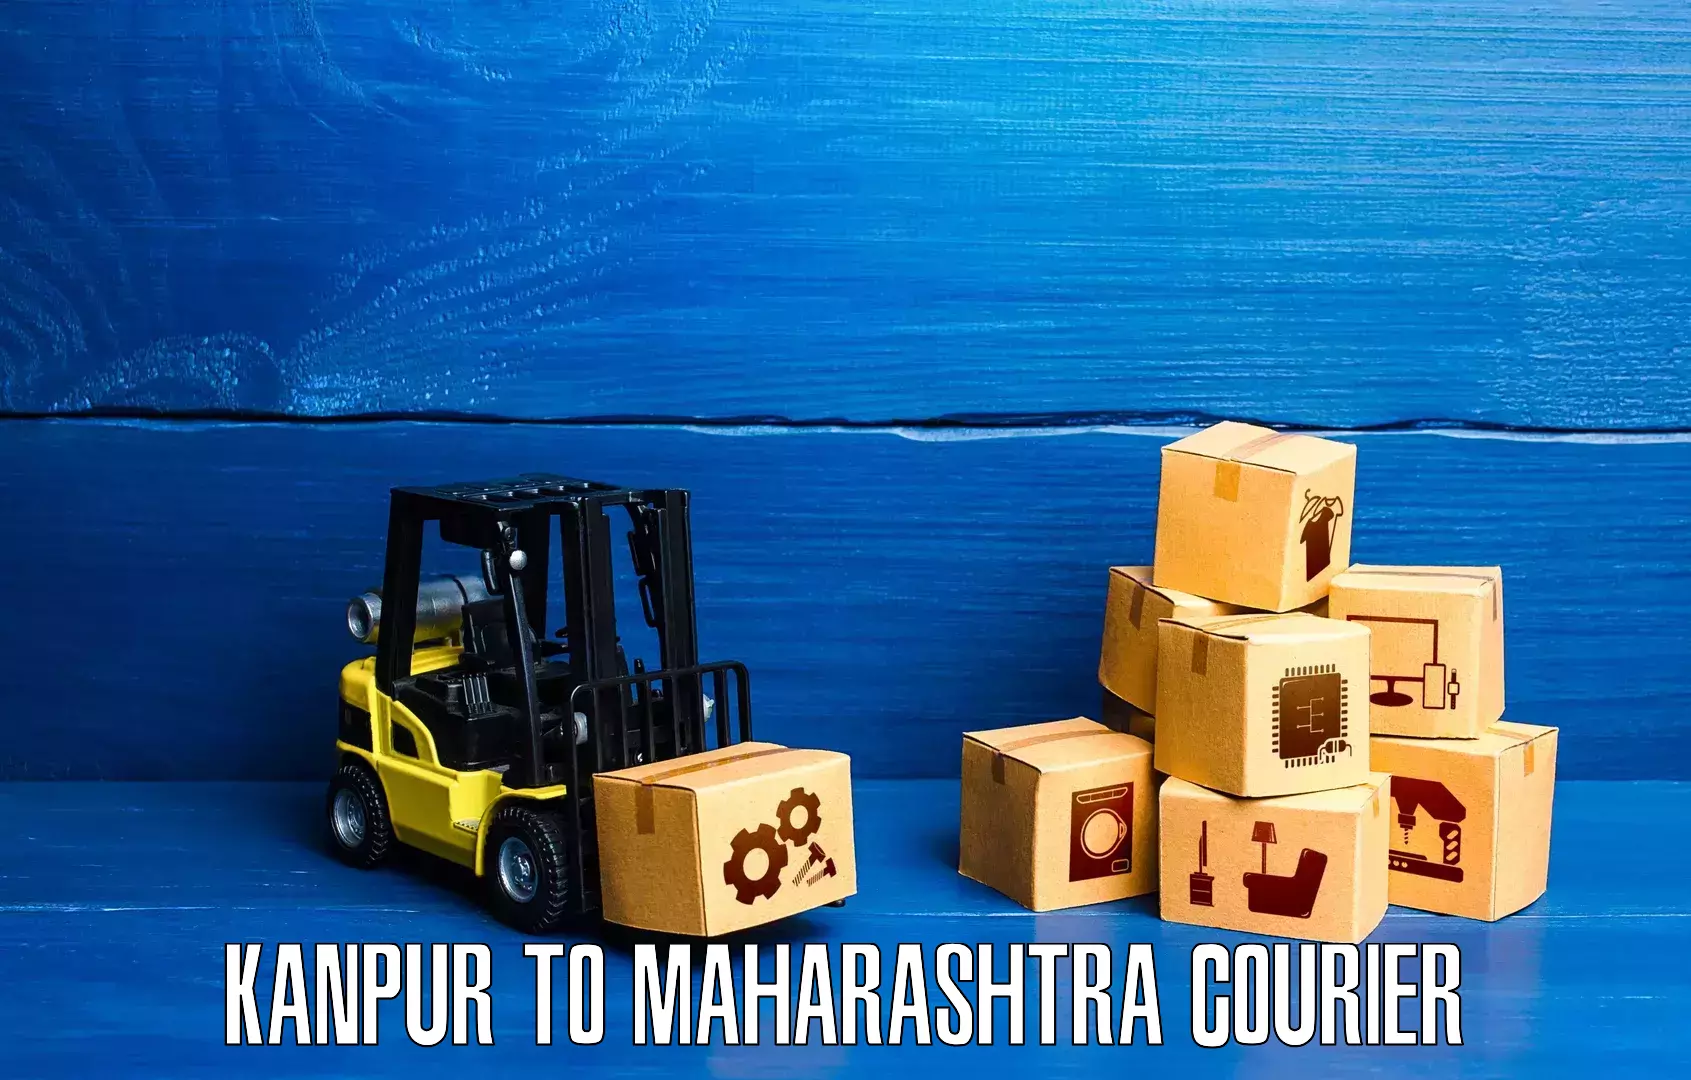 Courier service partnerships Kanpur to Sinnar